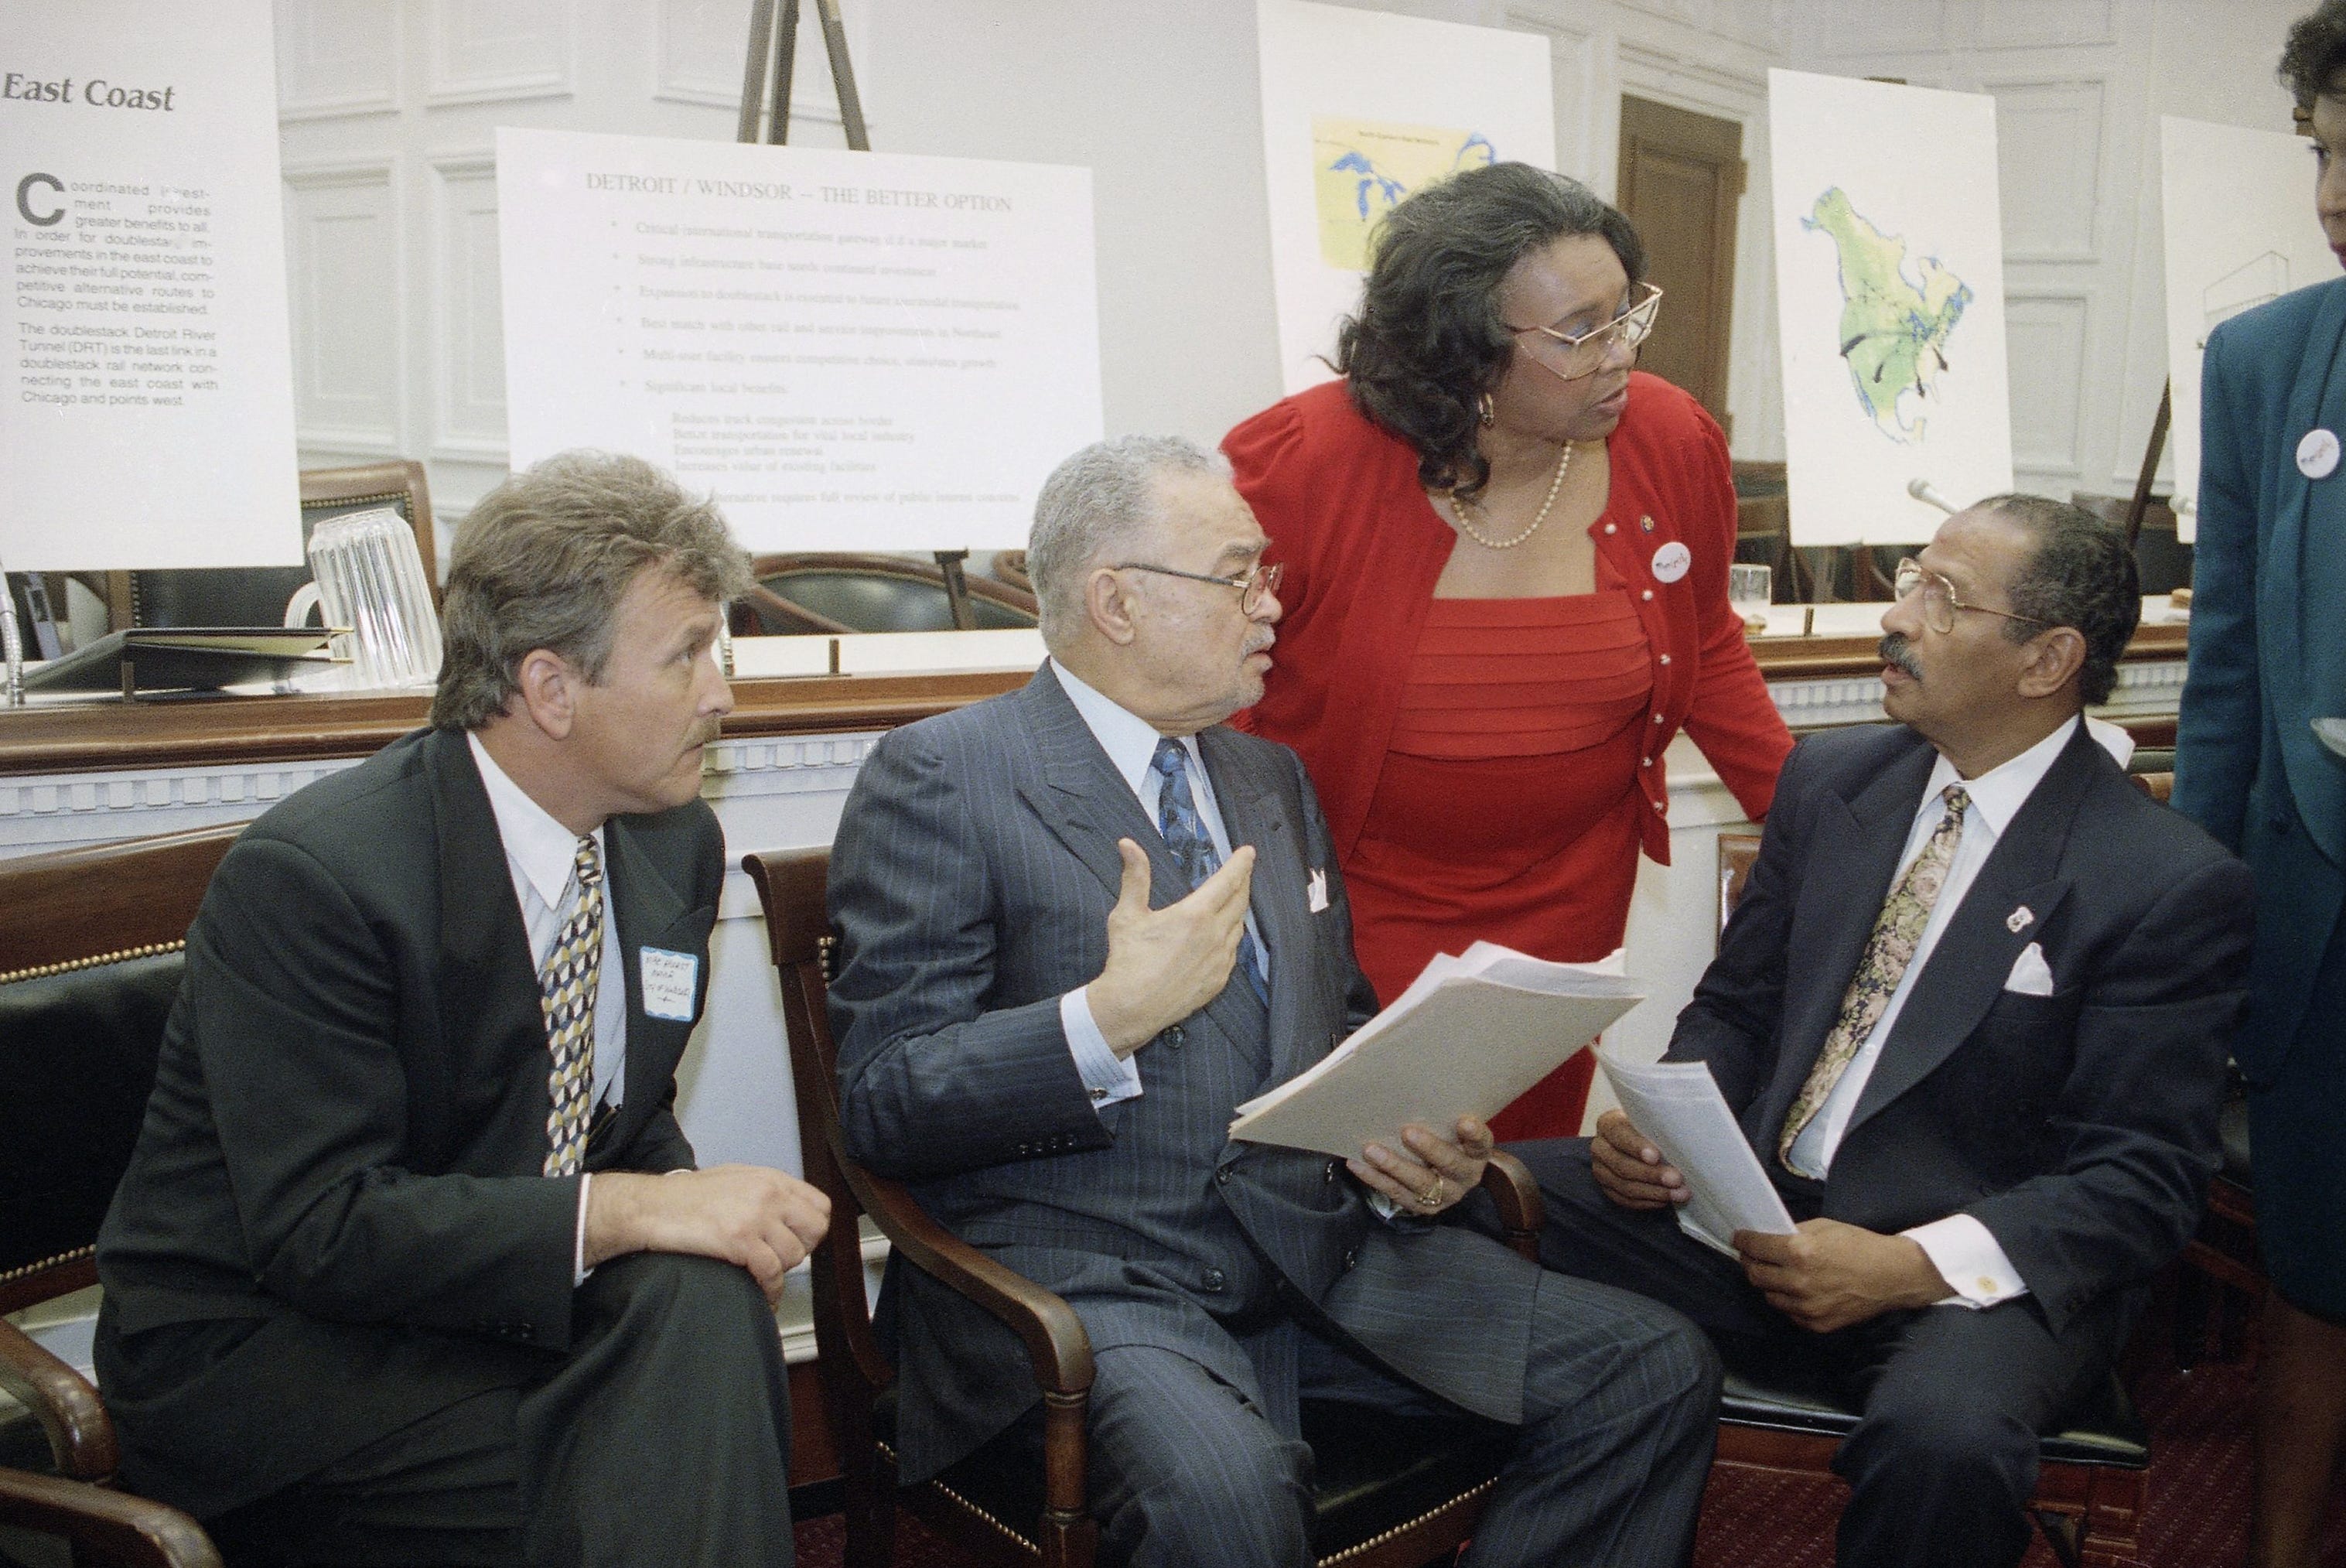 From left are Windsor, Ontario Mayor Mike Hurst; Detroit Mayor Coleman Young; U.S. Rep. Barbara-Rose Collins; and Rep. John Conyers, Jr., meeting on Capitol Hill in Washington on May 6, 1993. Young lobbied lawmakers against a train tunnel planned between Port Huron and Sarnia, Ontario. Collins died at the age of 82 on Thursday, Nov. 4, 2021, her family announced in a statement. She was the first Black woman from Michigan elected to Congress.